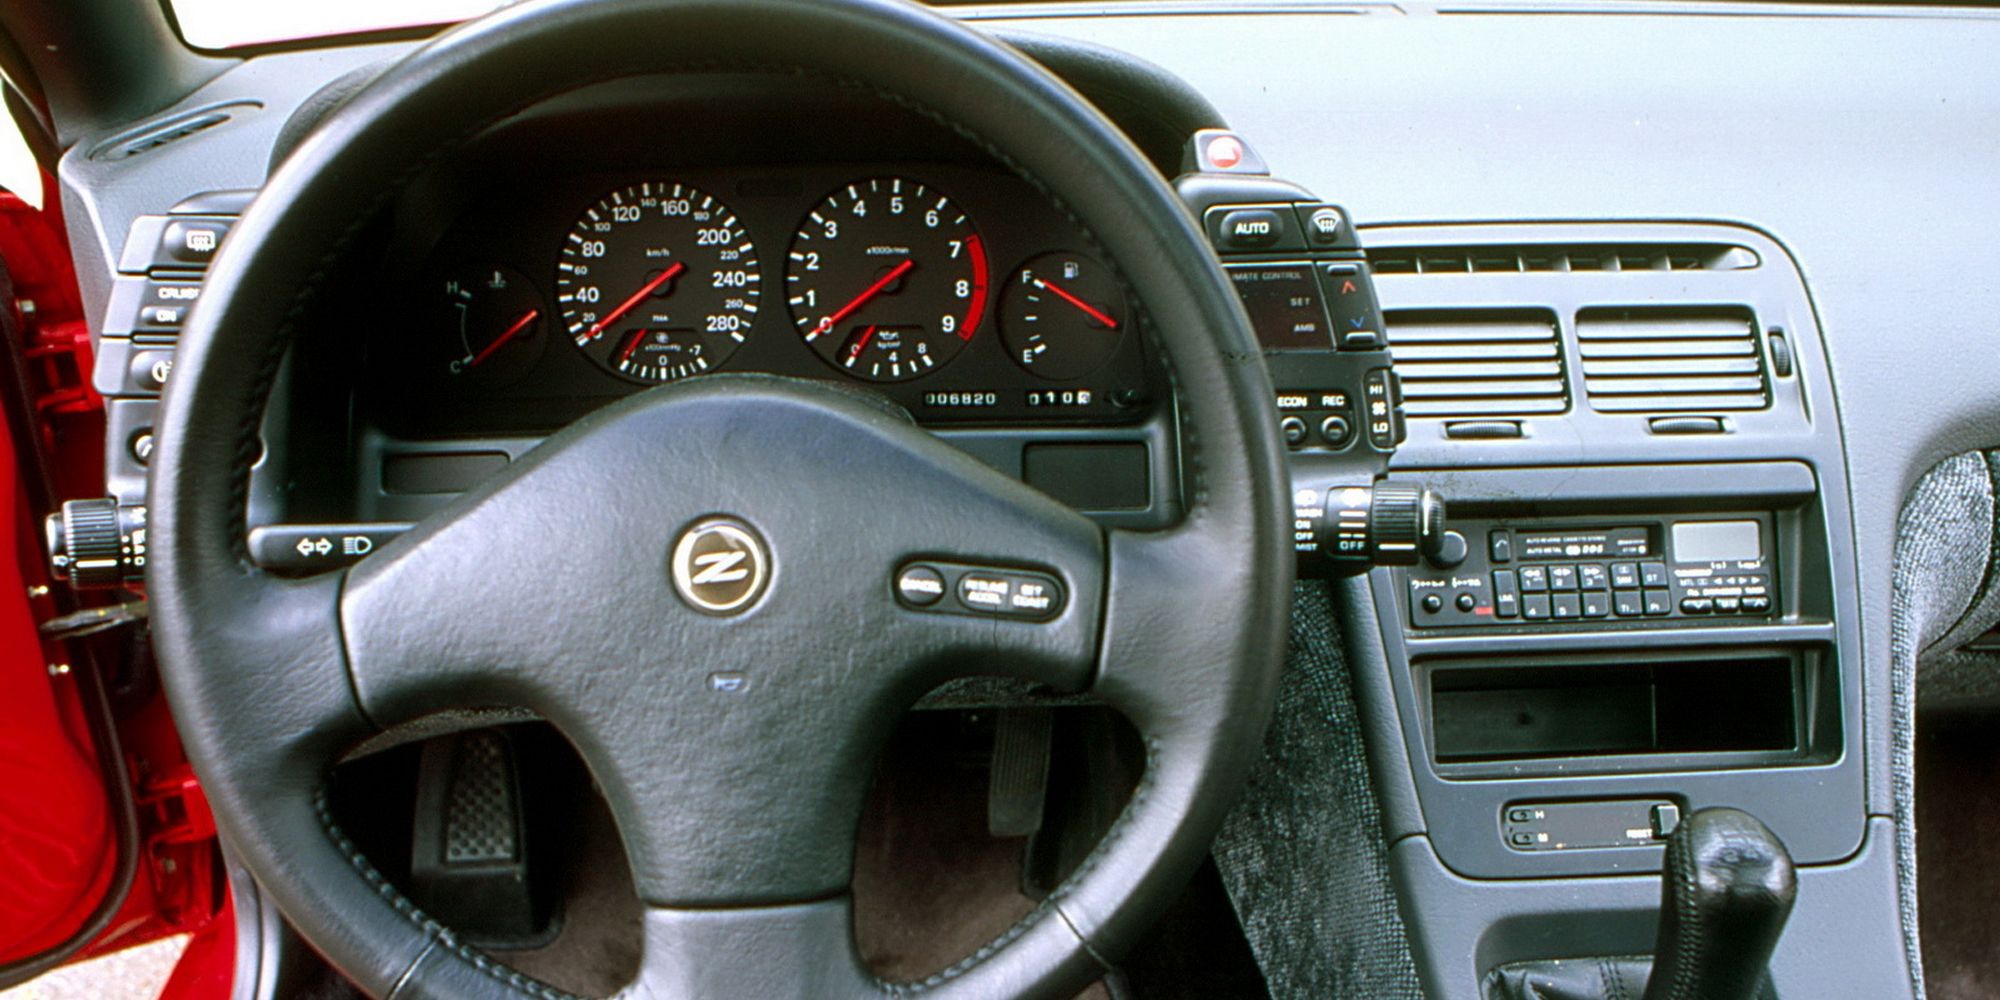 The interior of the 300ZX